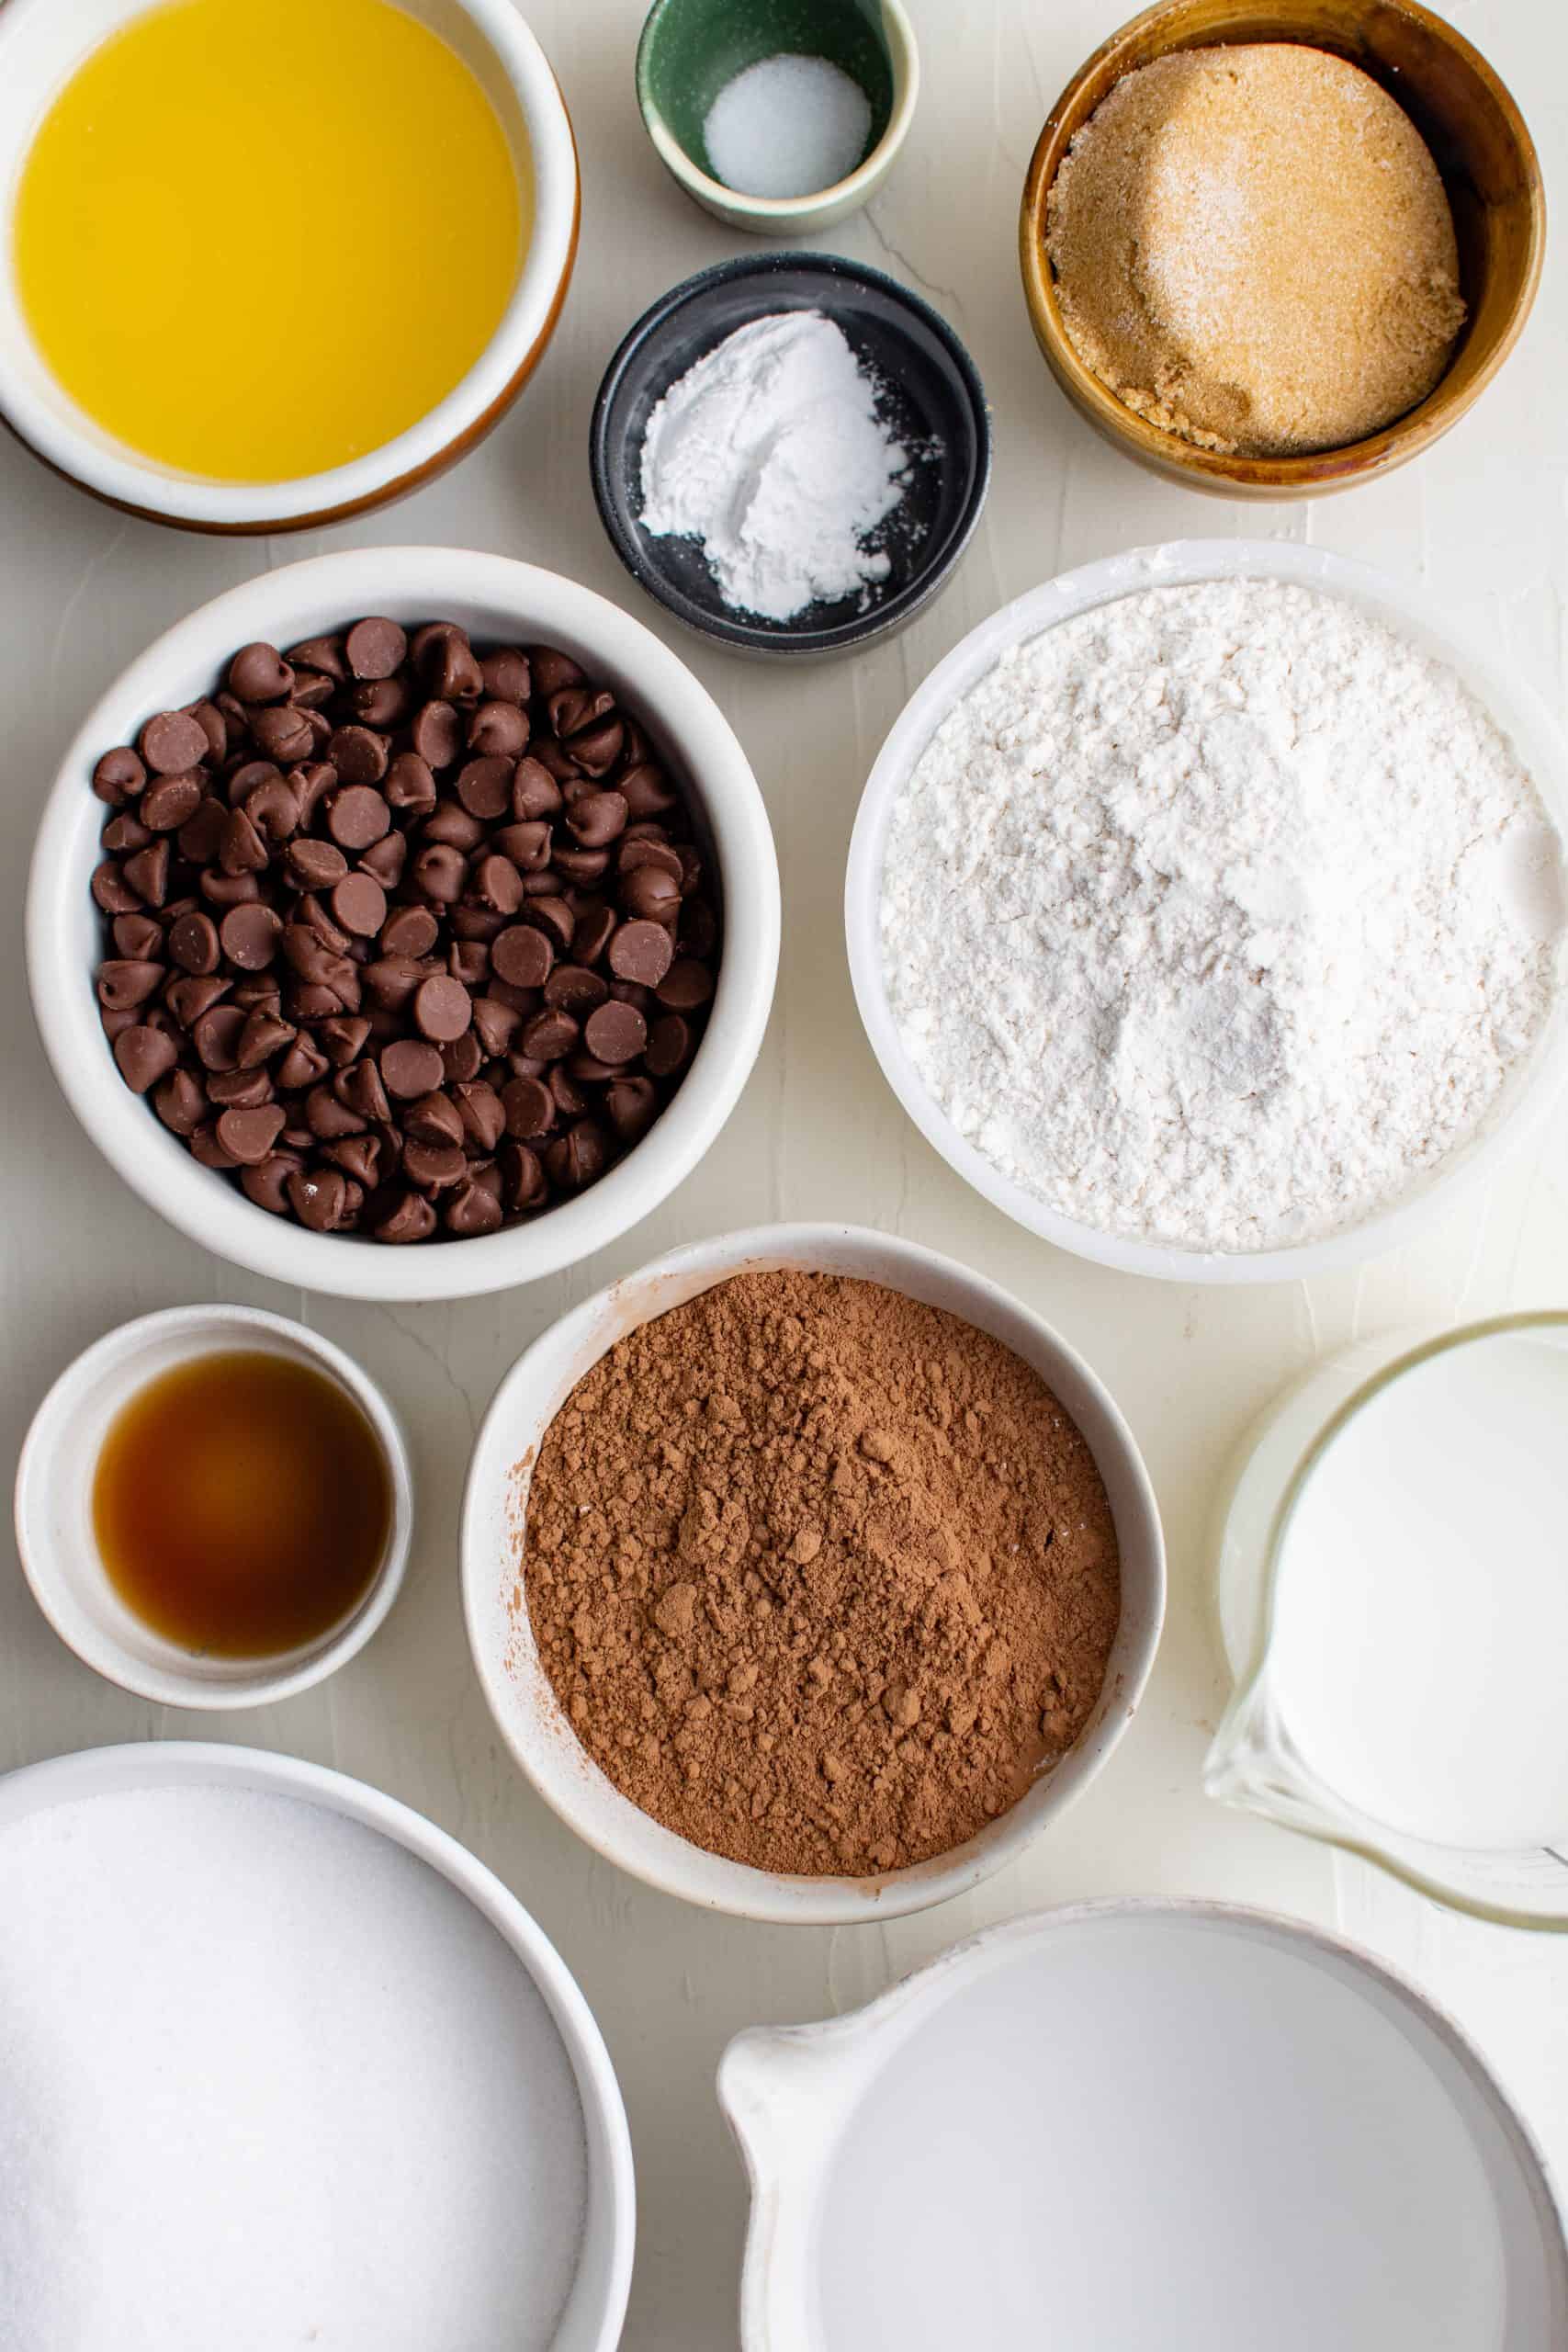 Ingredients needed to make Homemade Chocolate Cobbler.